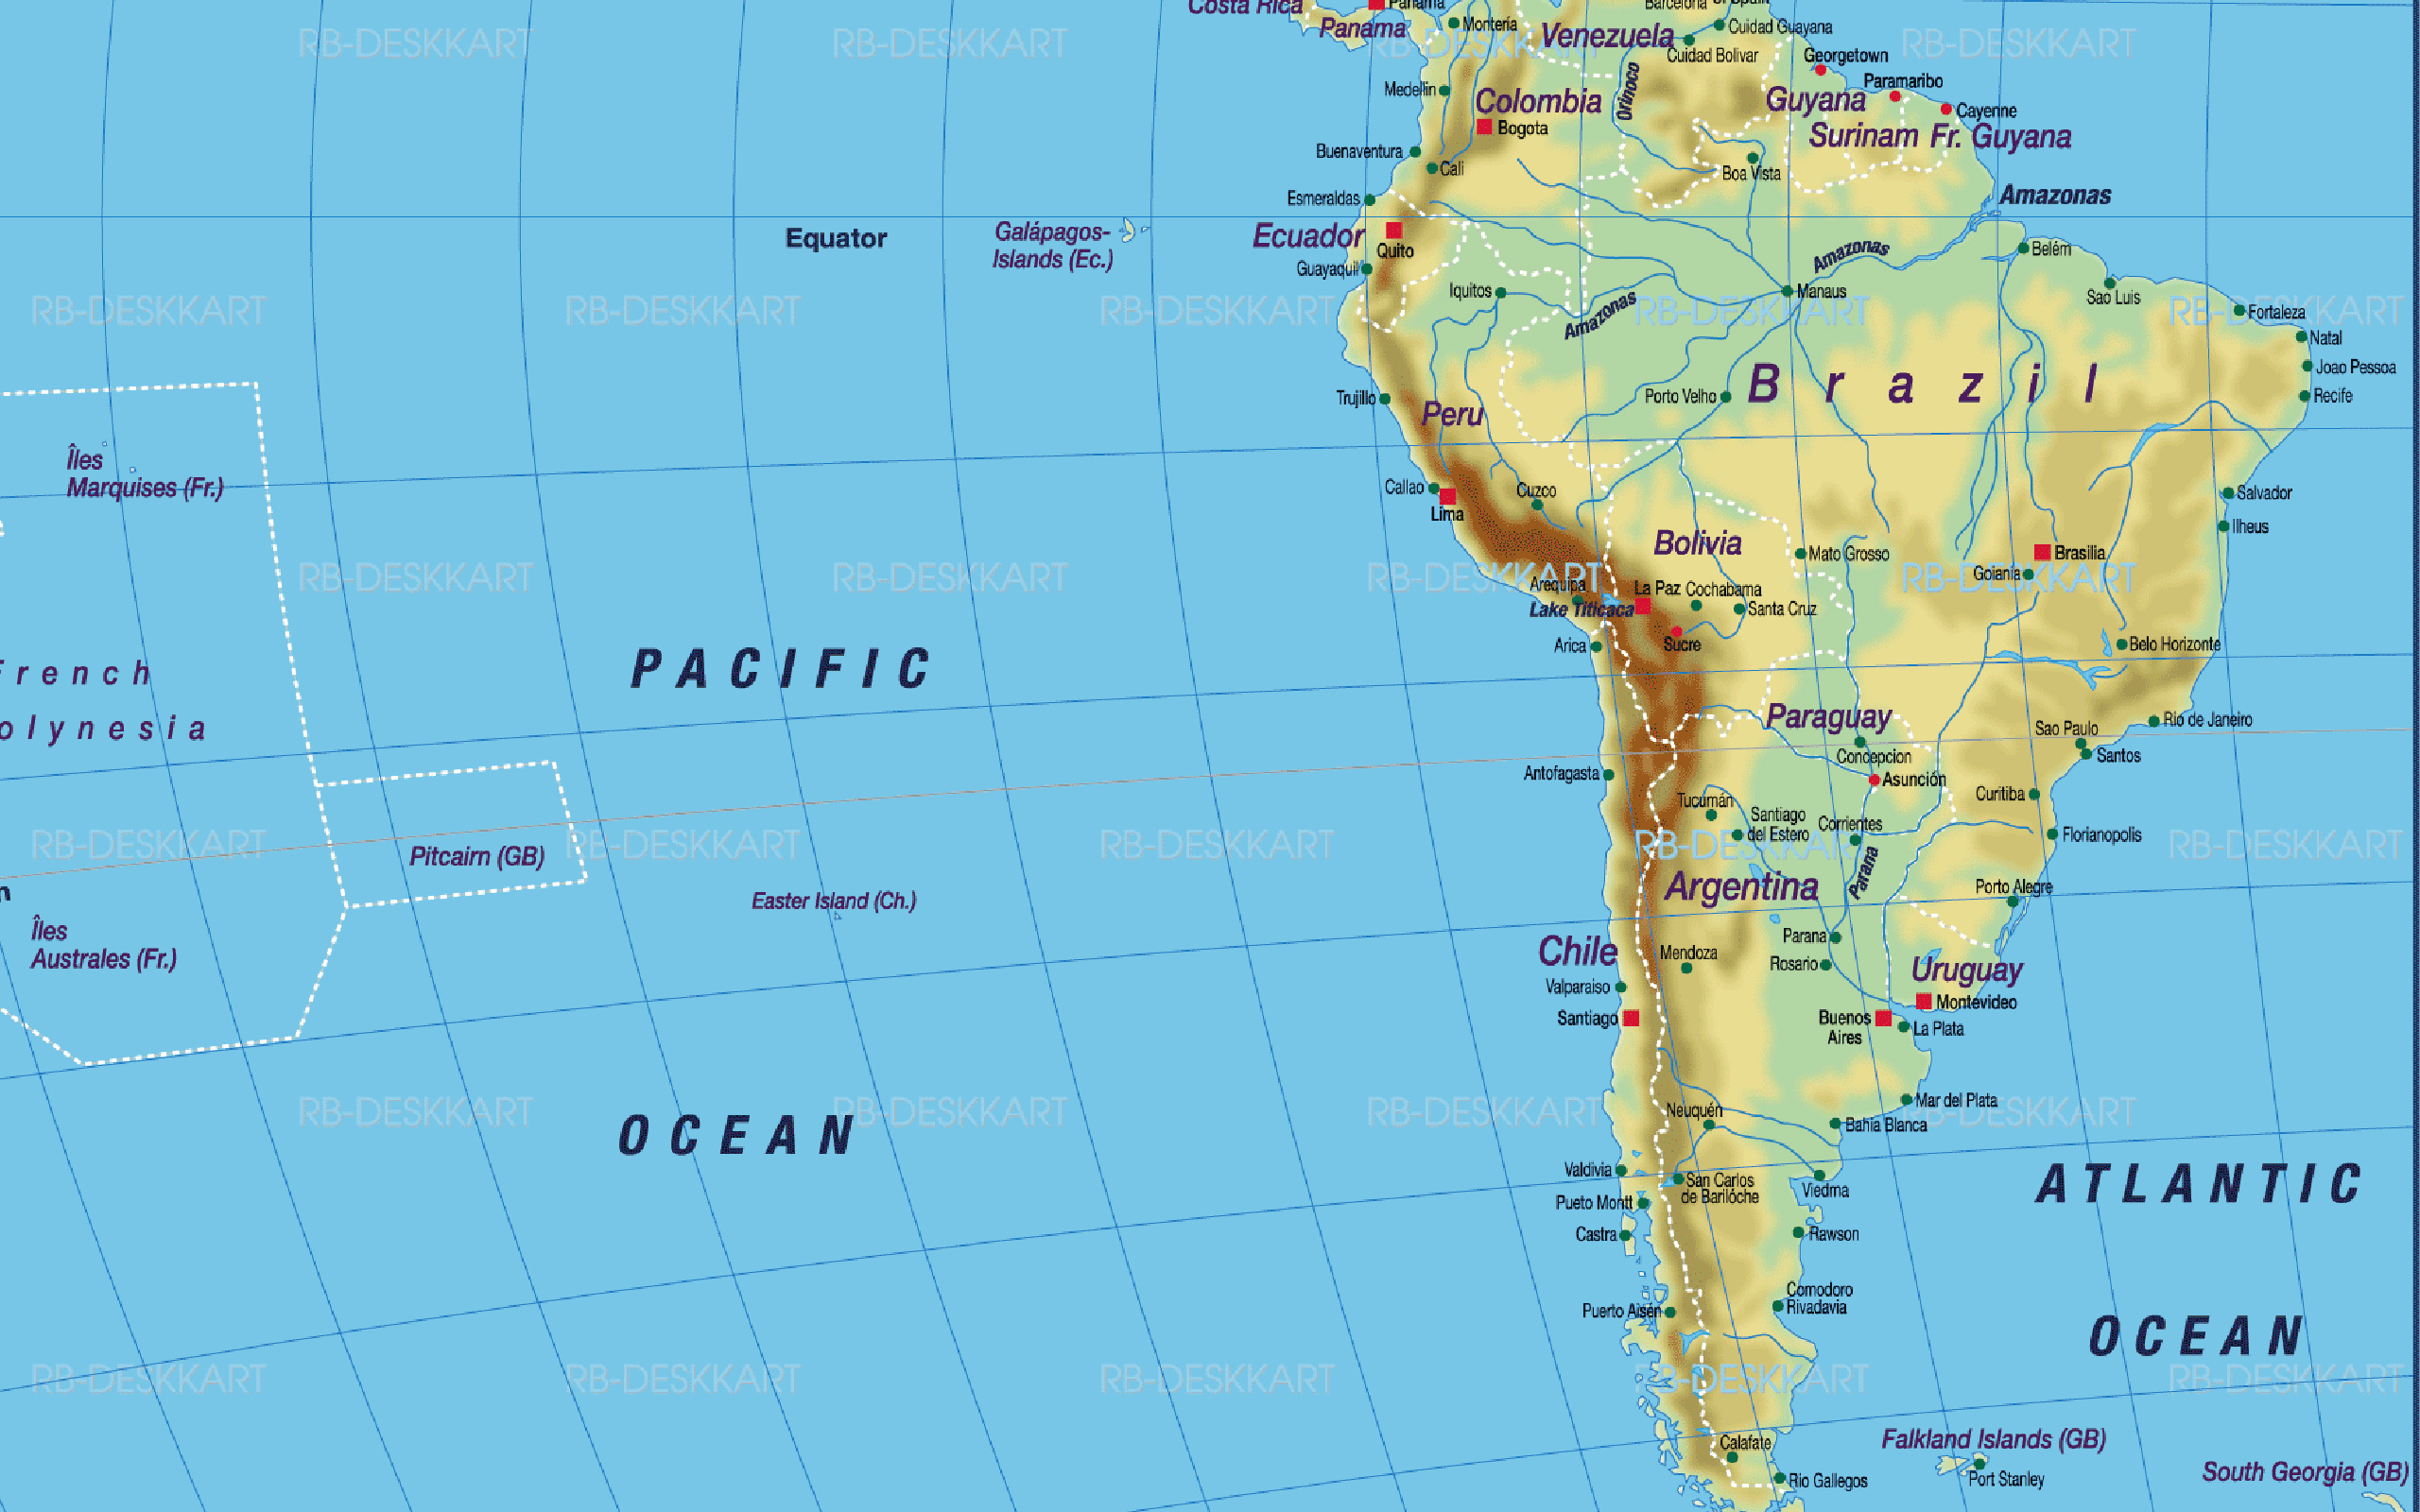 Download wallpaper Geographic map of South America, USA map, South America continent, Brazil map, Argentina map, Geographic map of Brazil for desktop with resolution 2560x1600. High Quality HD picture wallpaper